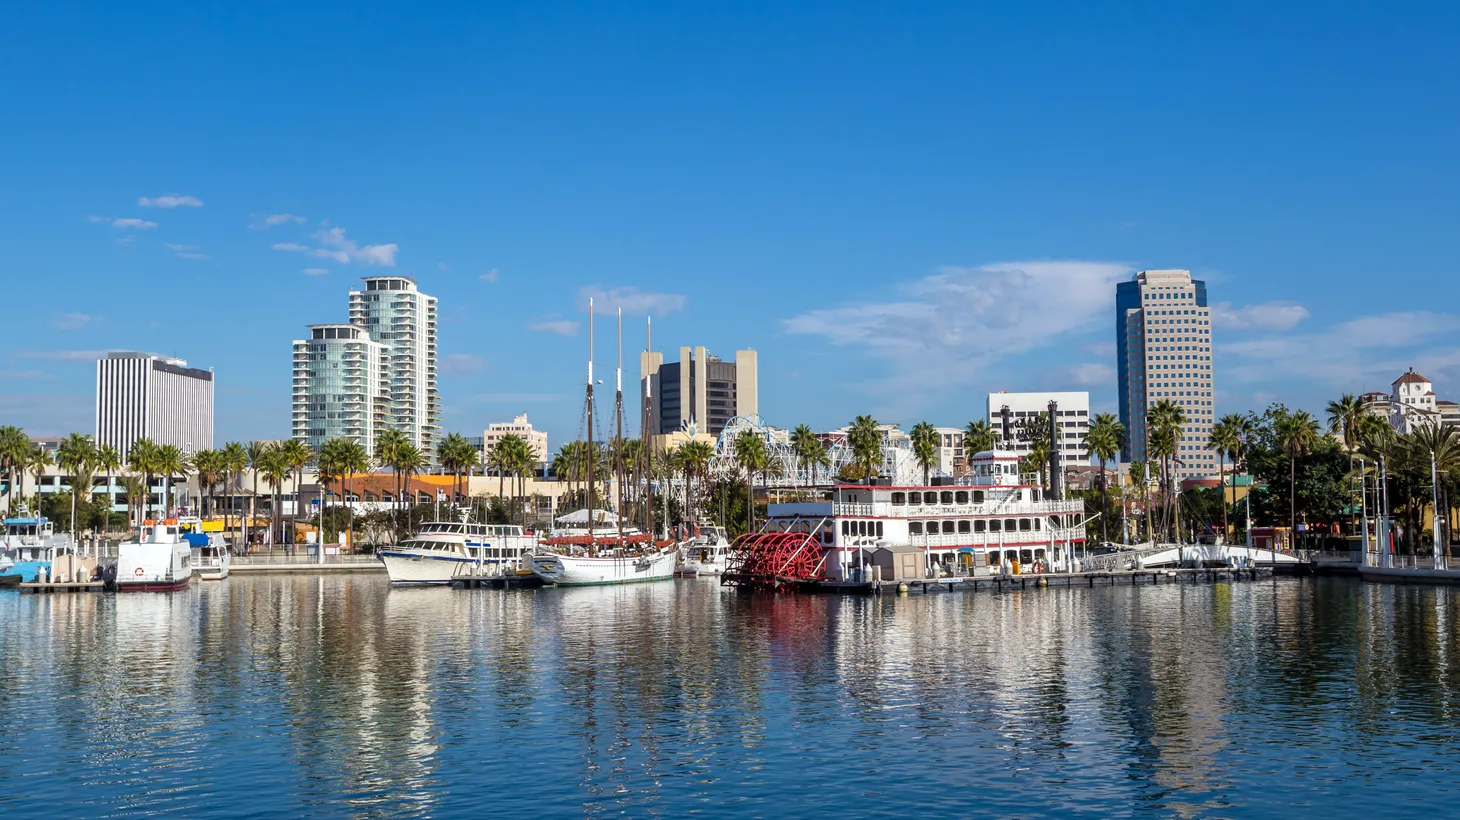 Long Beach faces many of the same challenges as Los Angeles, from housing and homelessness to pollution and public safety.